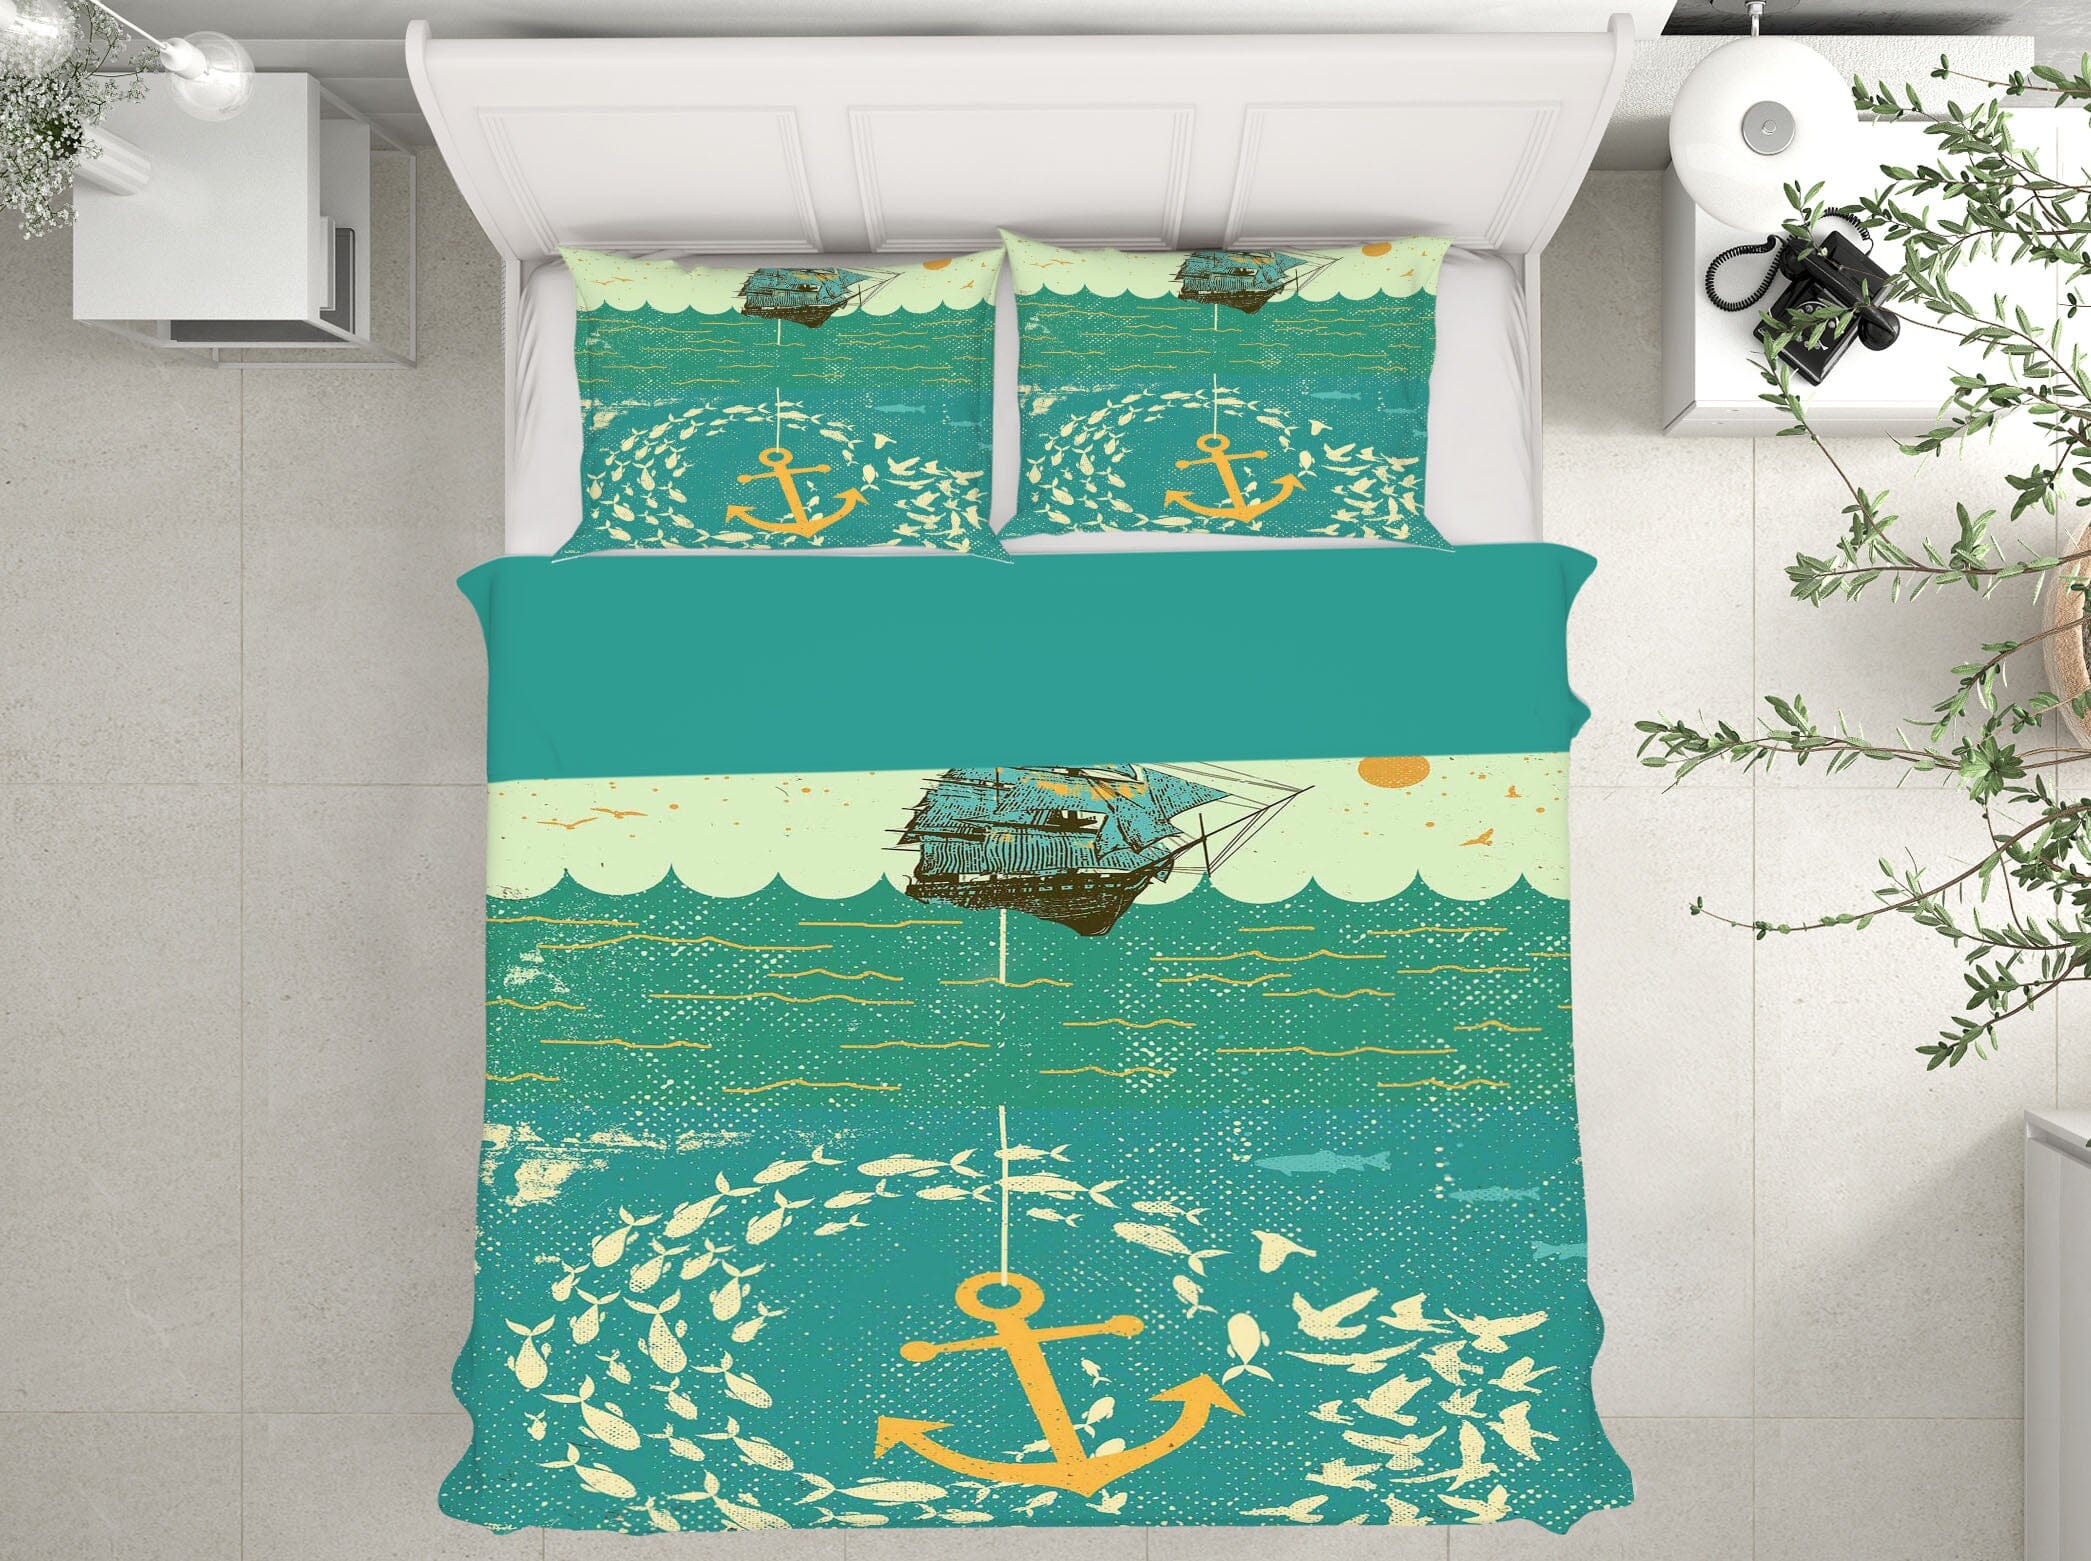 3D School Of Fish 2106 Showdeer Bedding Bed Pillowcases Quilt Quiet Covers AJ Creativity Home 